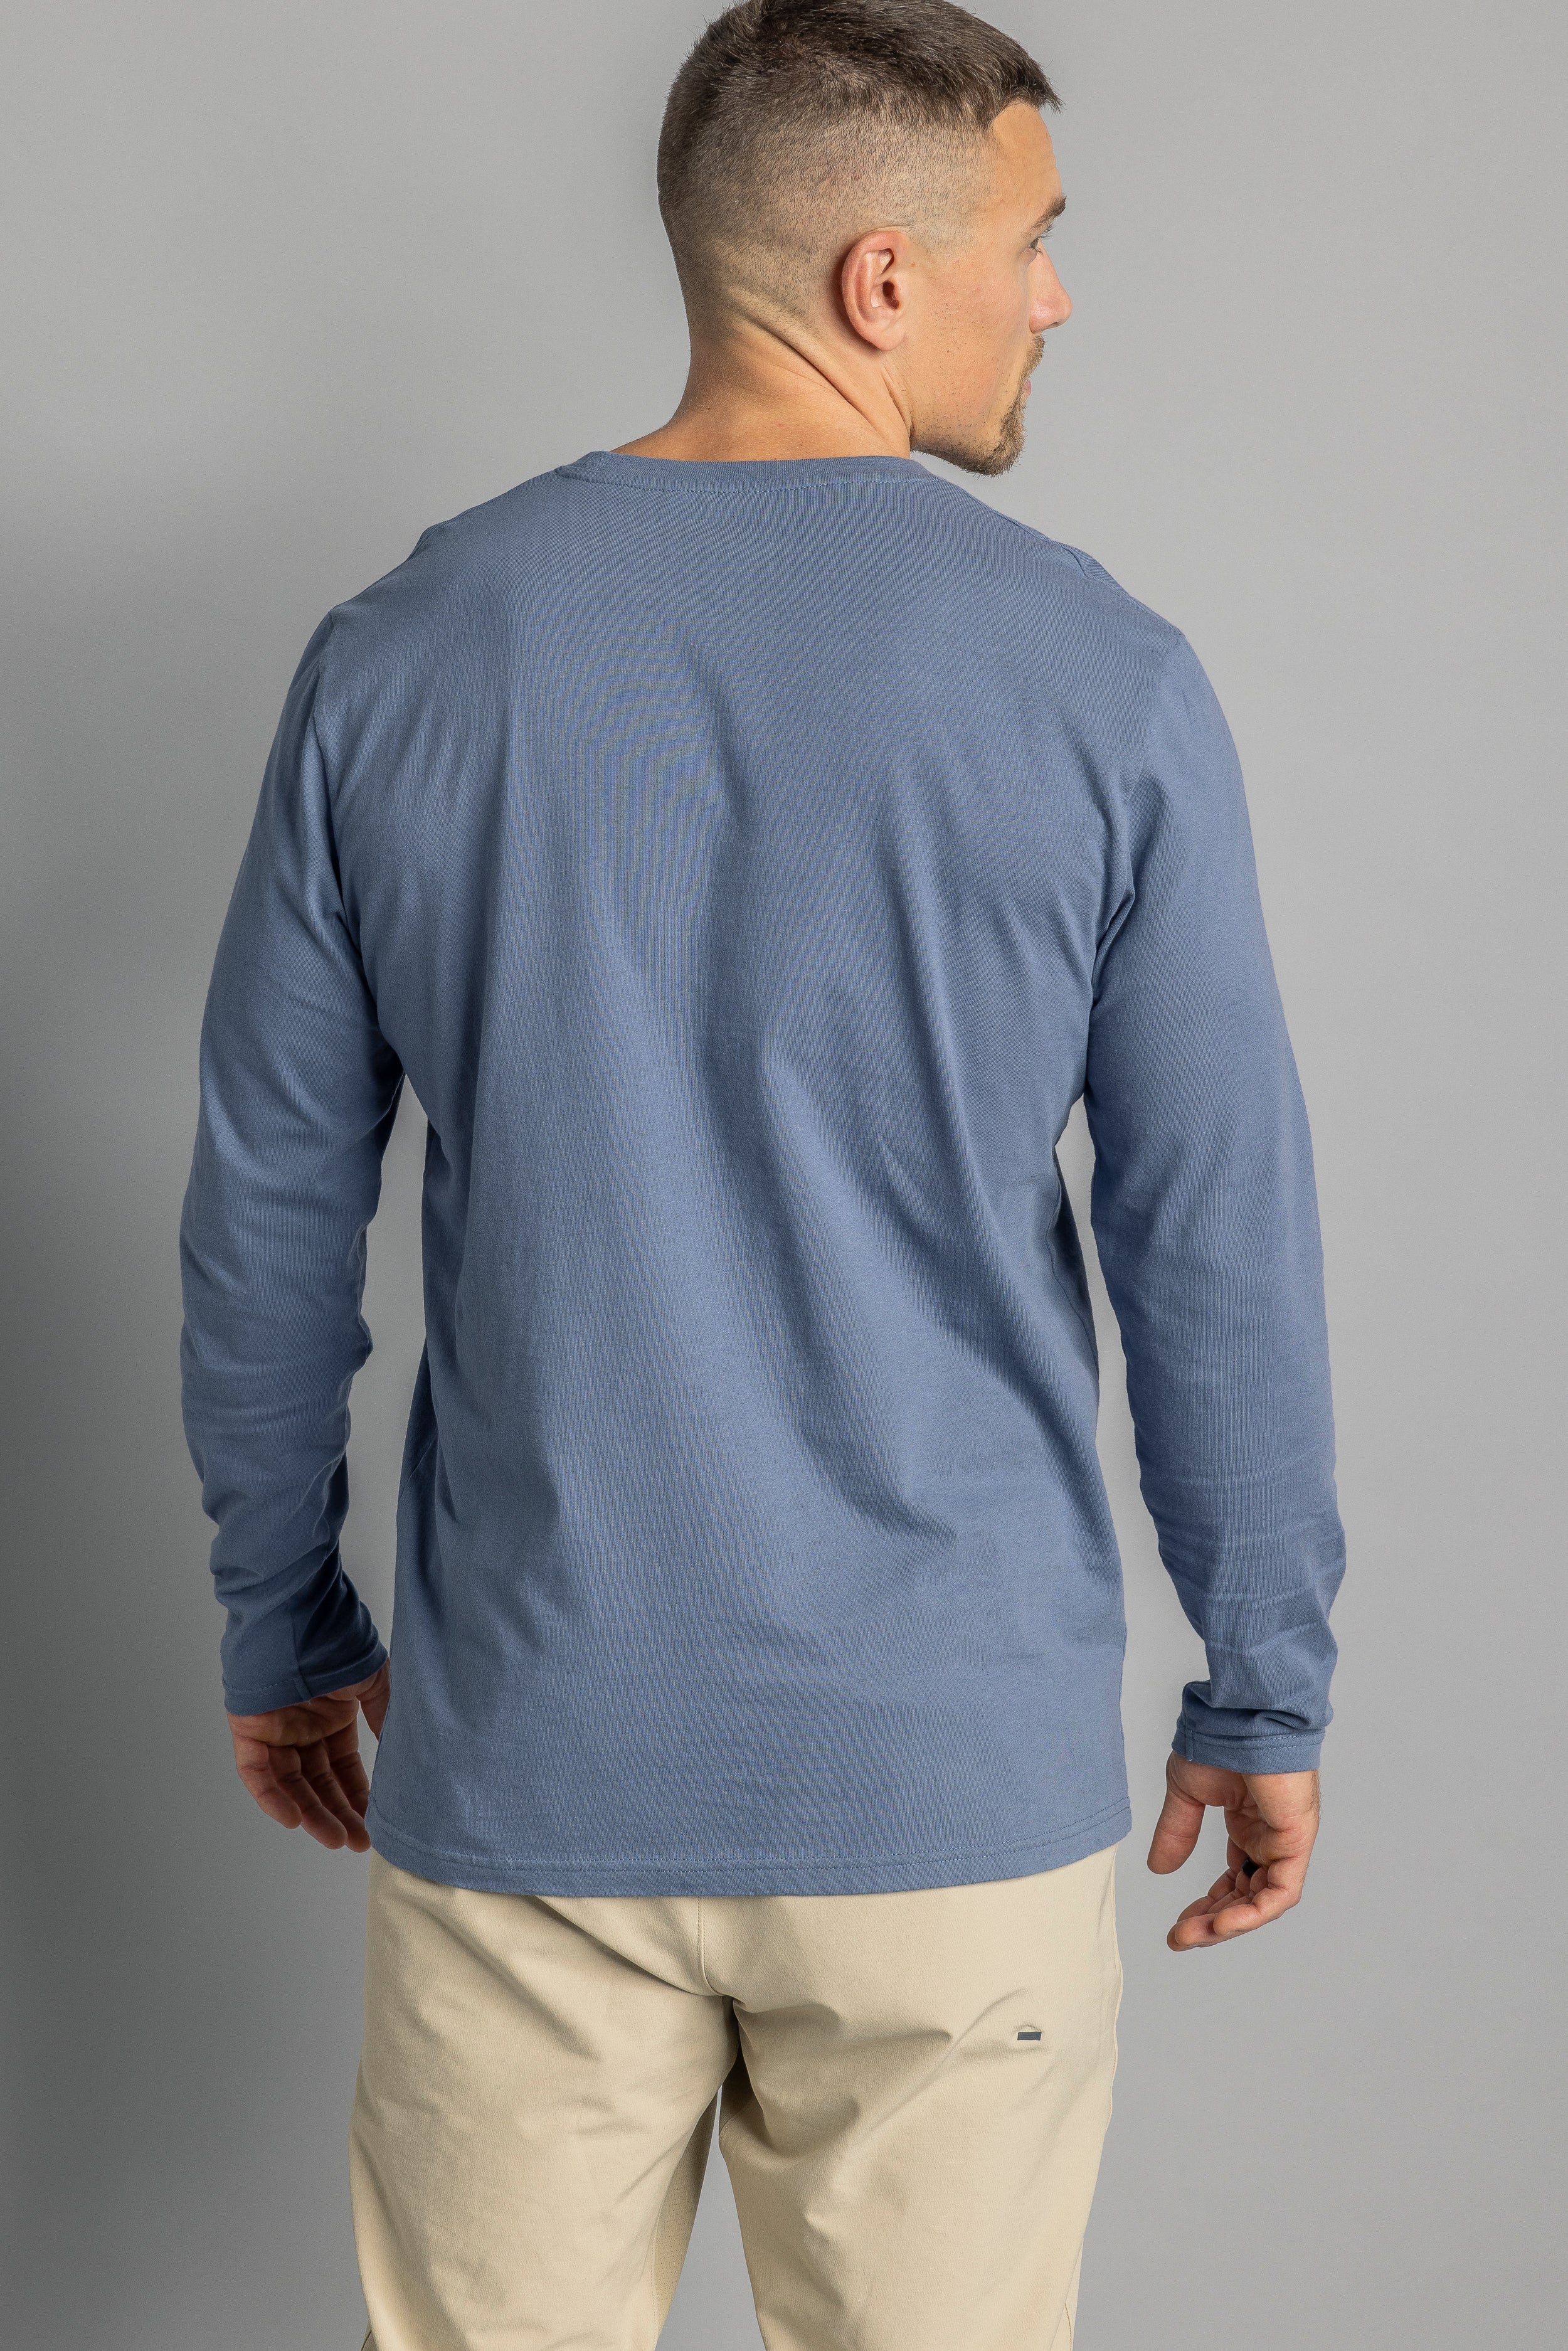 Blue long-sleeved recycled cotton T-shirt from DIRTS